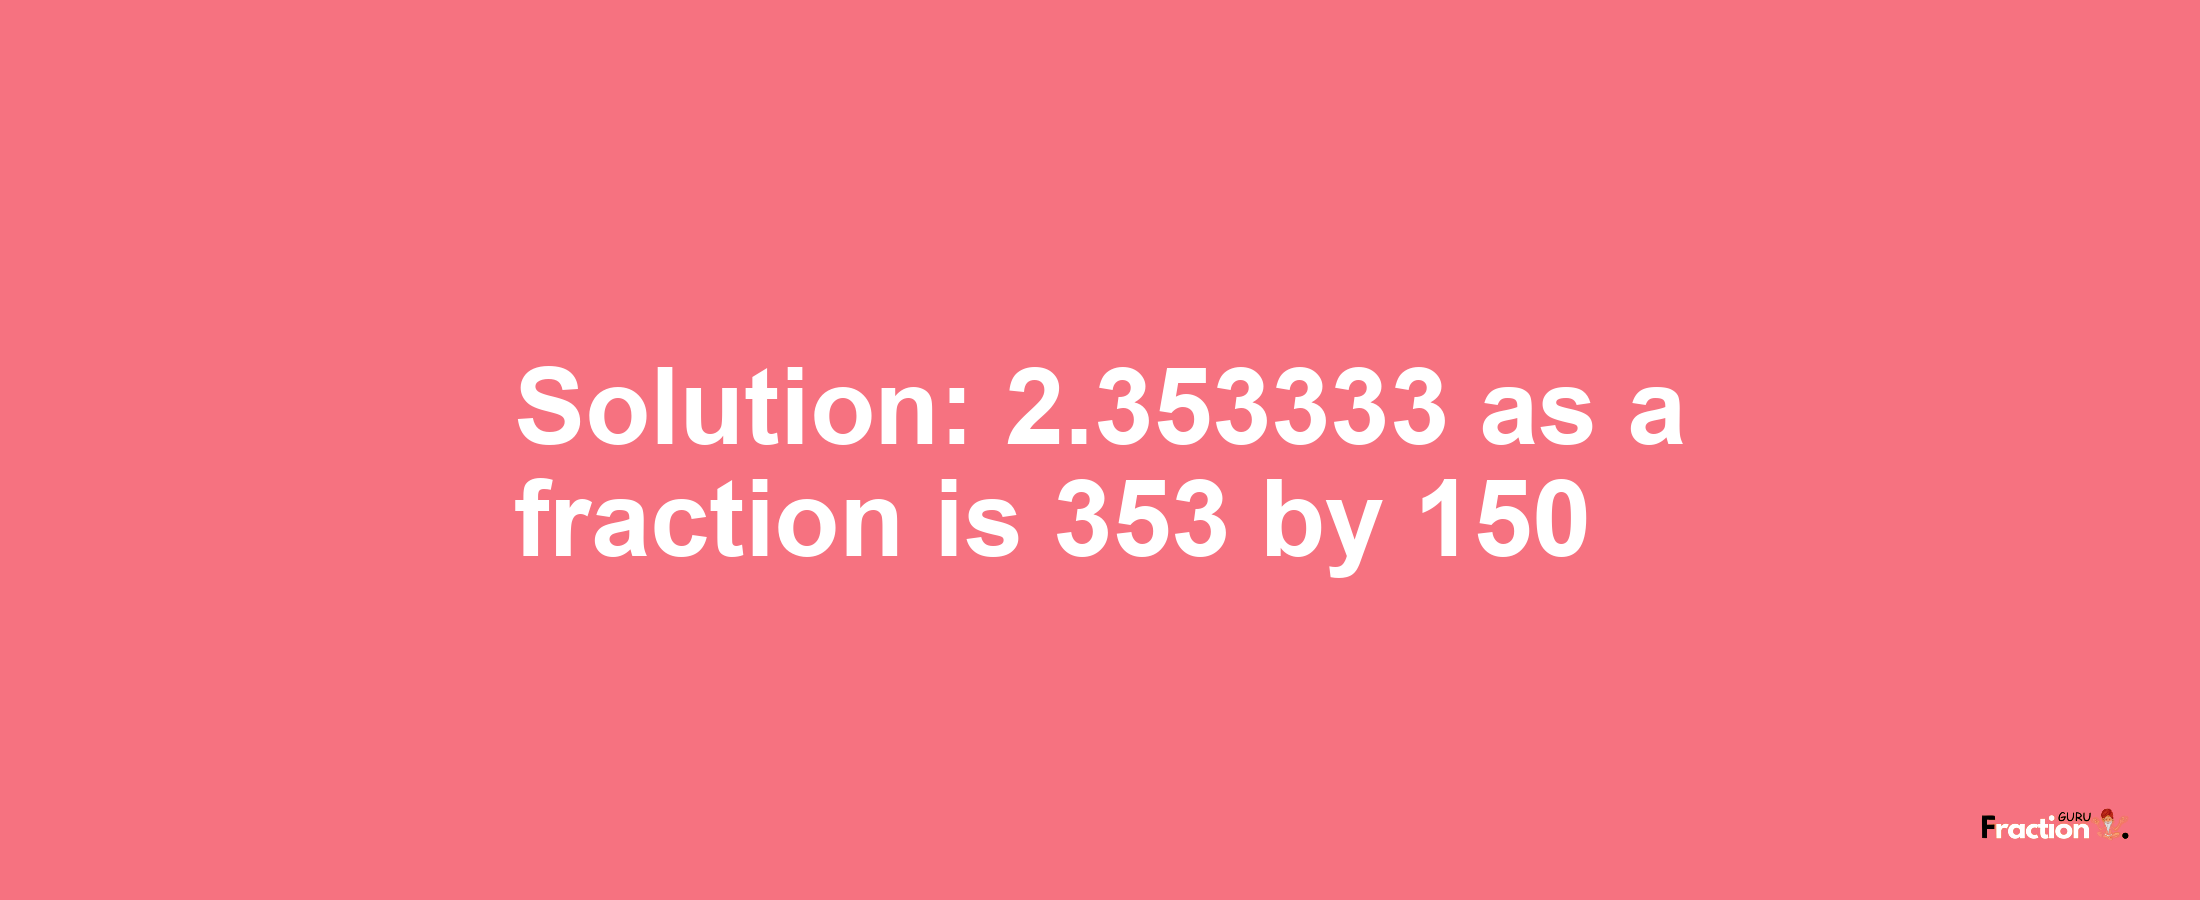 Solution:2.353333 as a fraction is 353/150